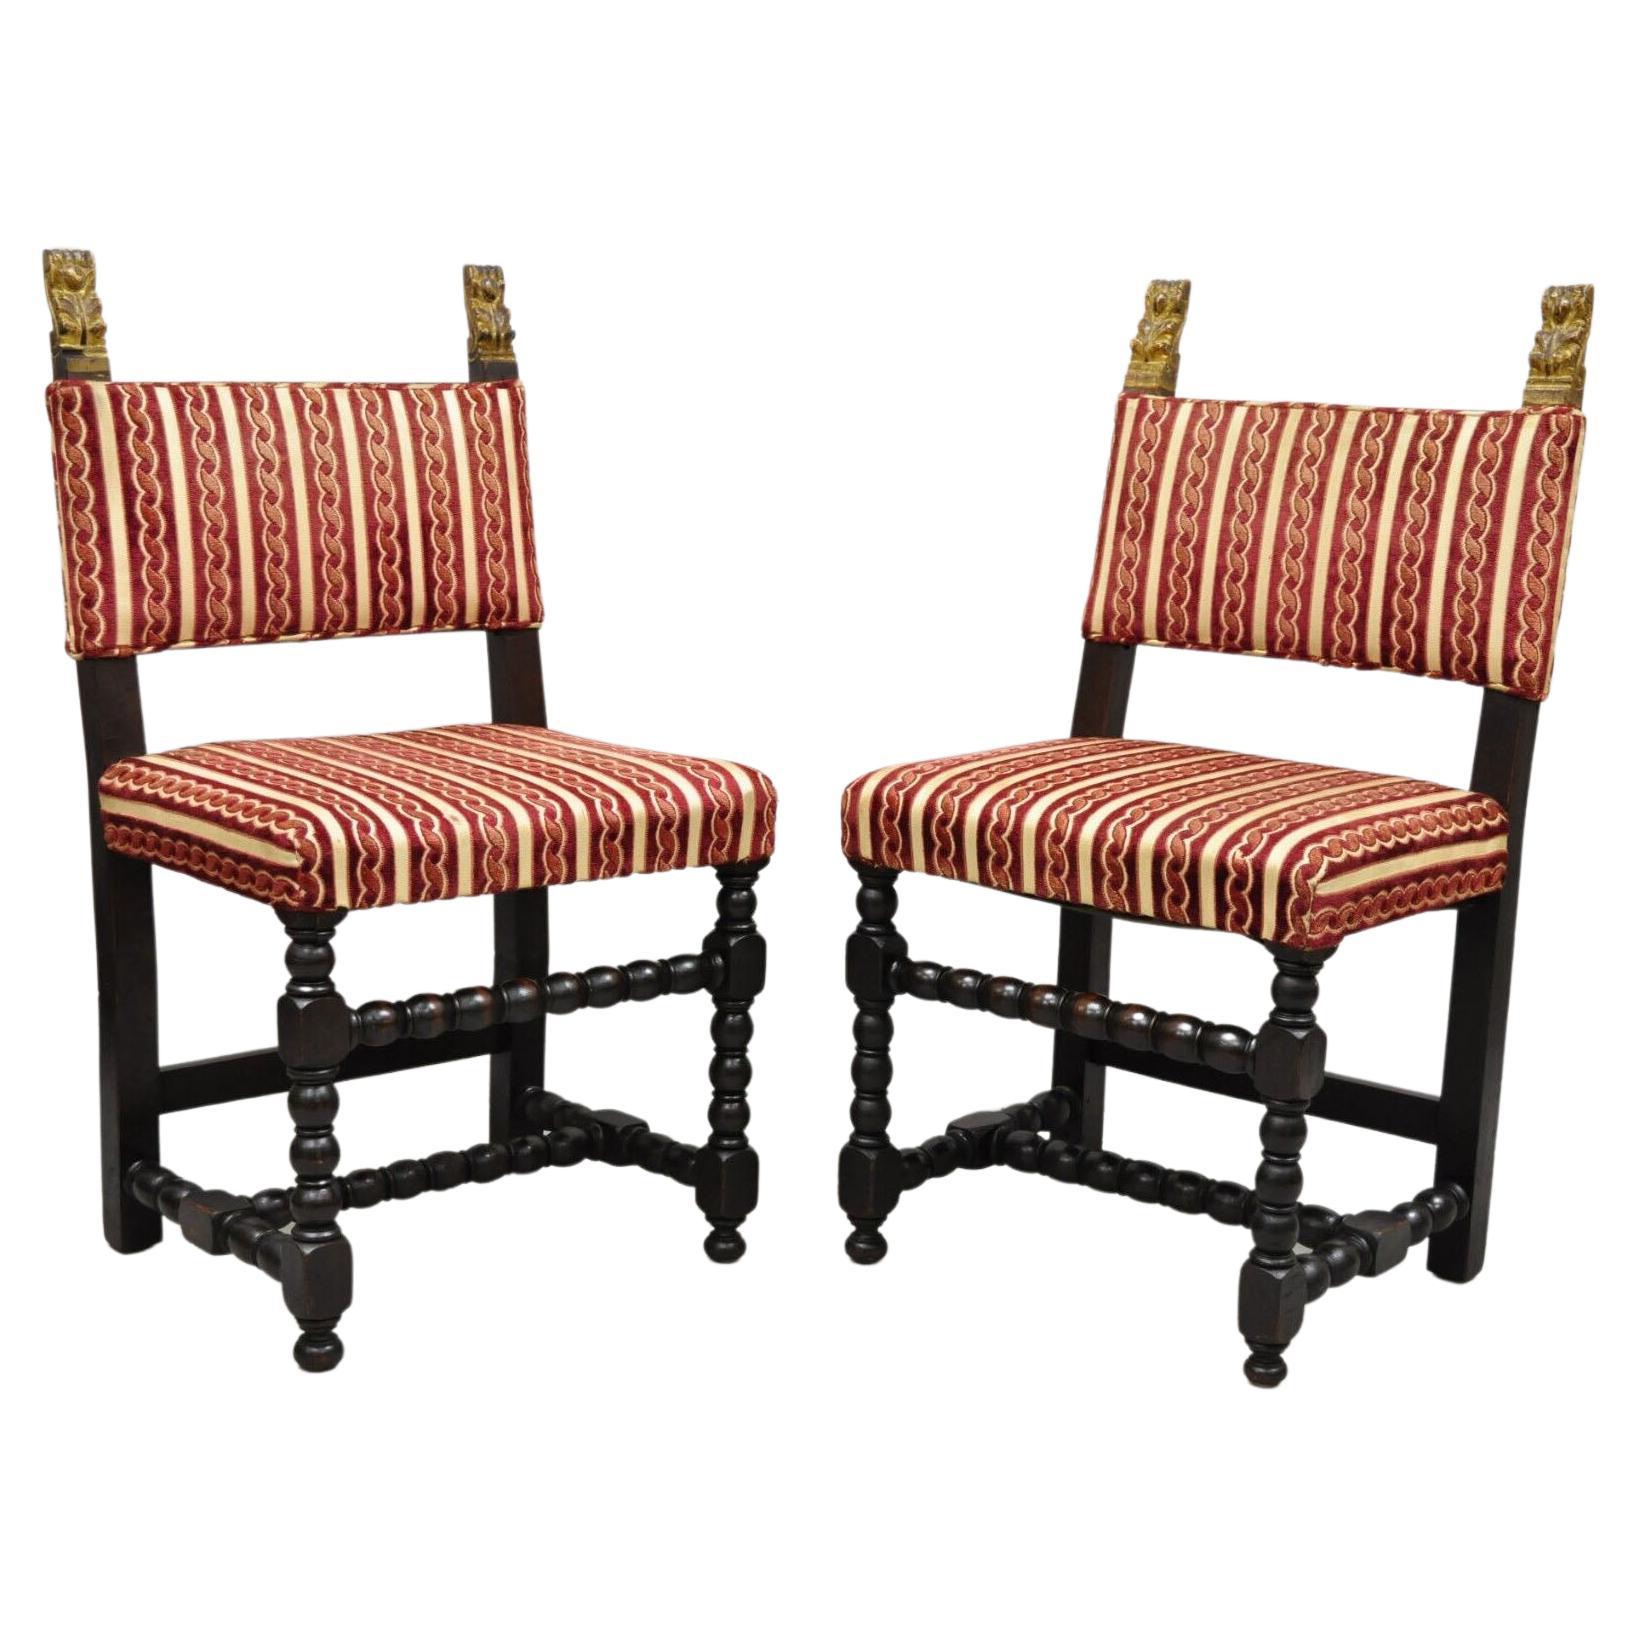 Antique Small Jacobean Style Turn Carved Walnut Accent Side Chairs - a Pair For Sale